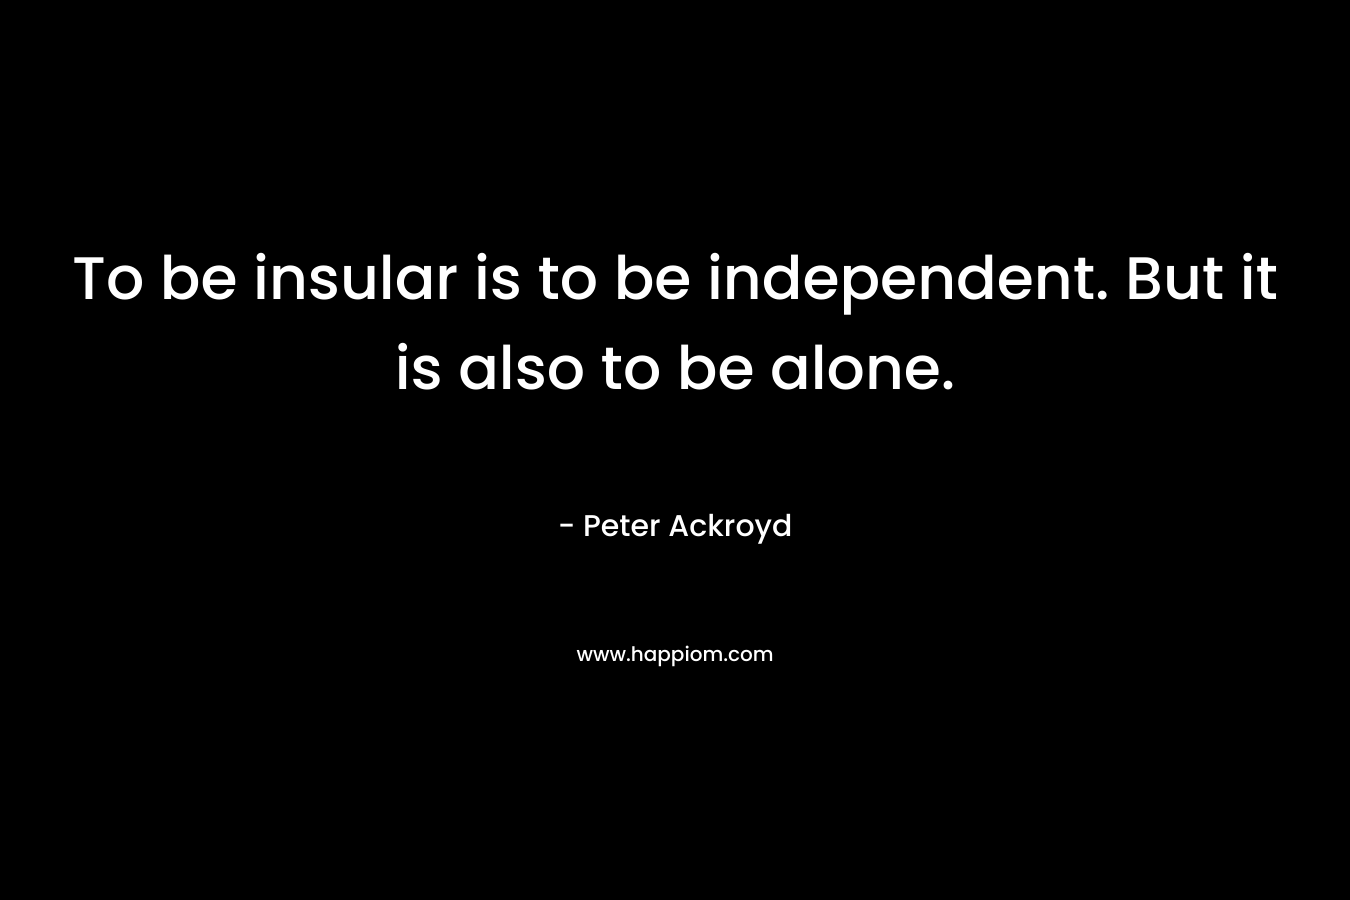 To be insular is to be independent. But it is also to be alone.